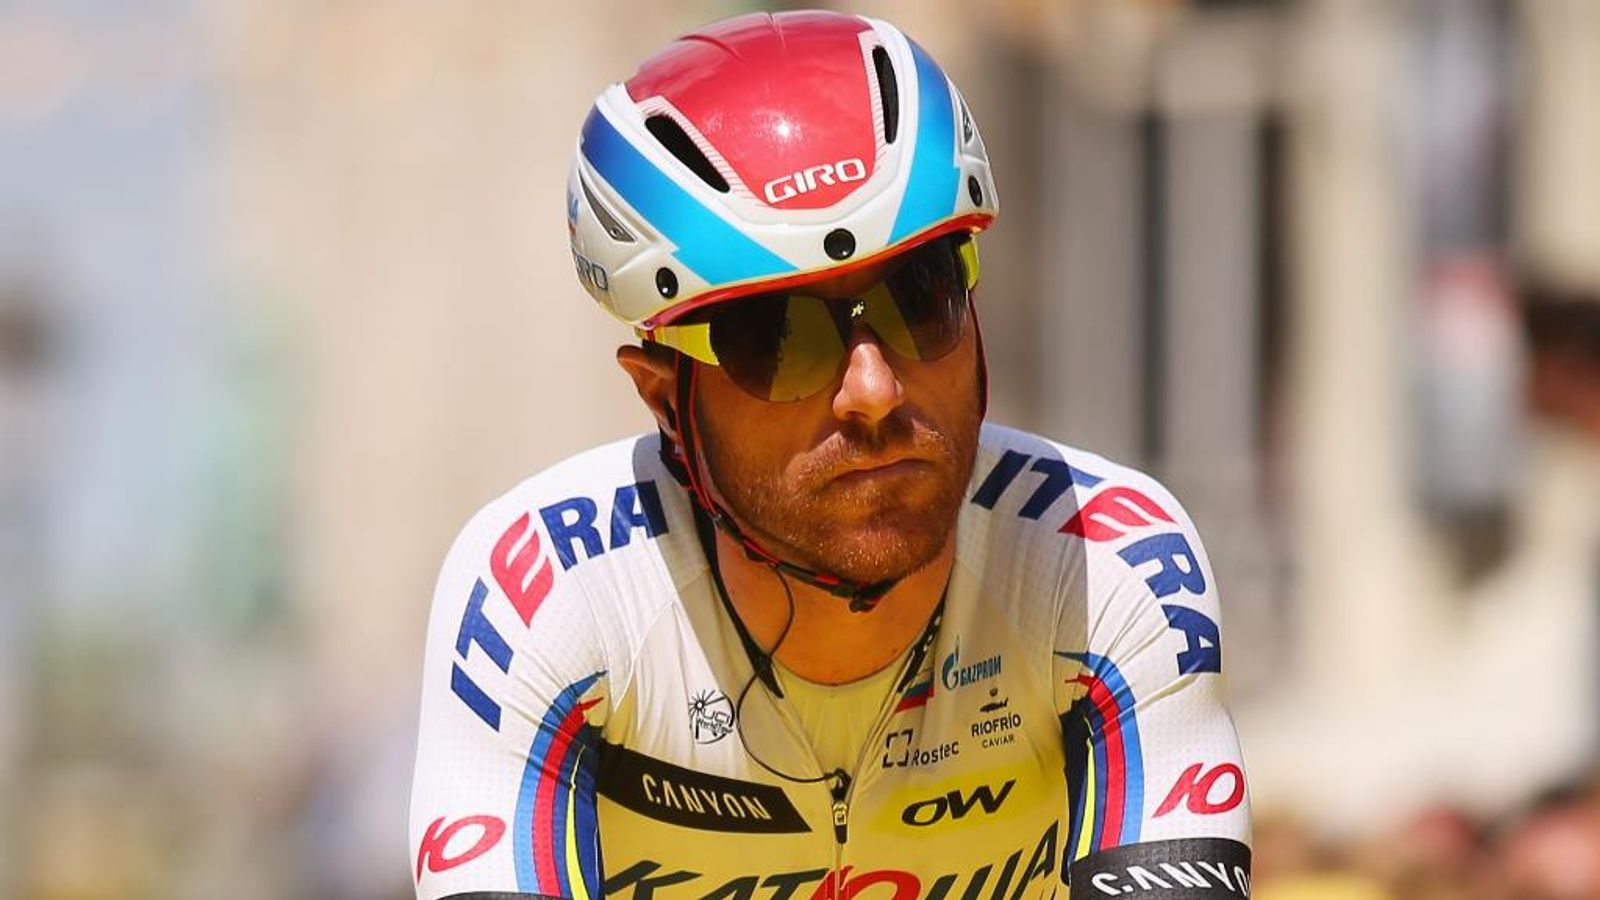 Luca Paolini suspended for 18 months for positive cocaine test ...